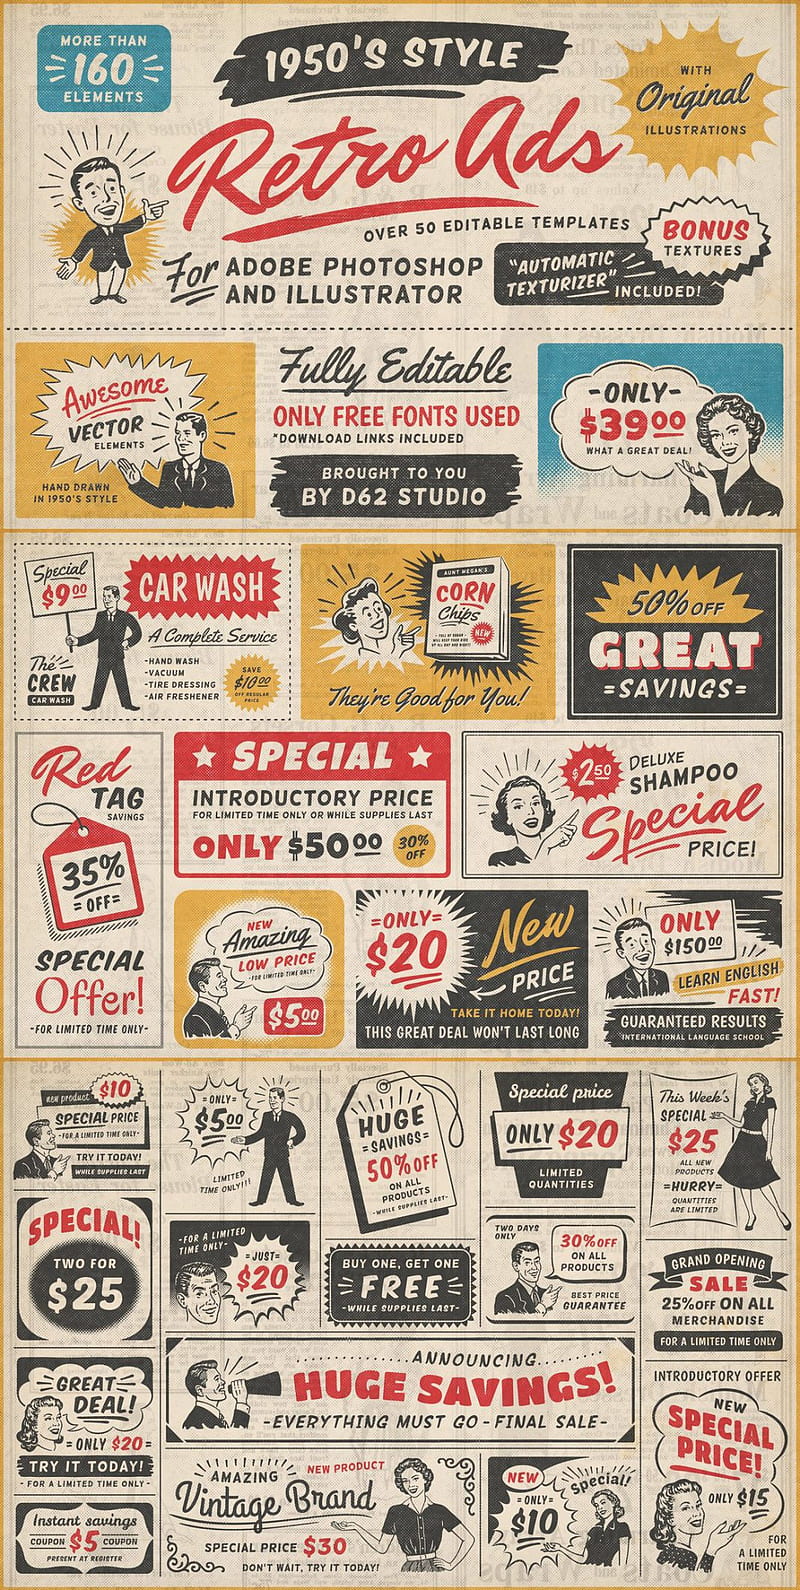 A vintage style advertisement template from the 1950s - 50s